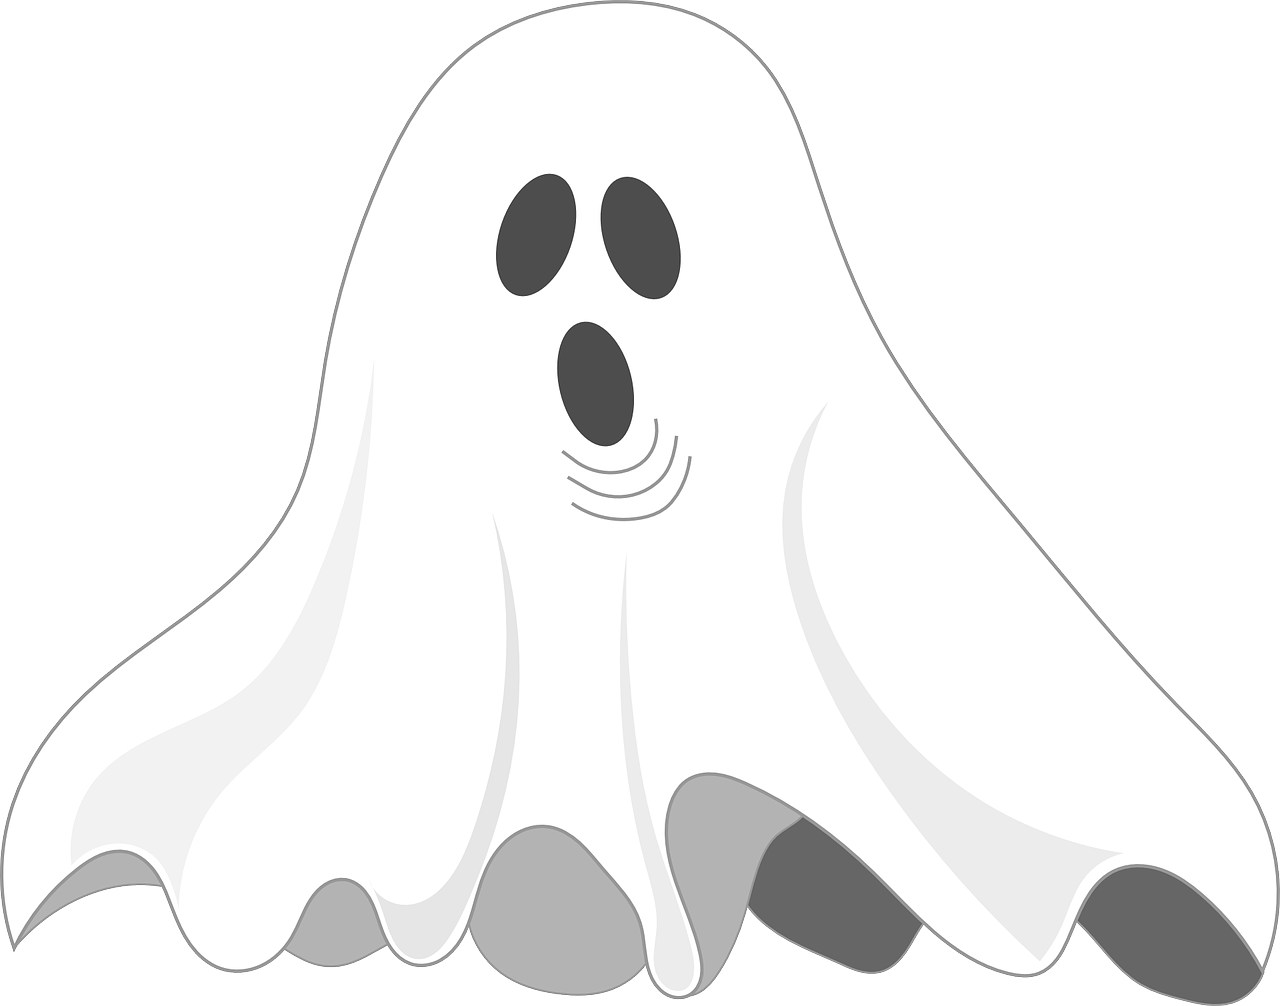 Scottish Family Offers £50,000 For Nanny Job In Haunted - Simple Ghost Illustration Halloween Pendant Necklace (1280x1006)